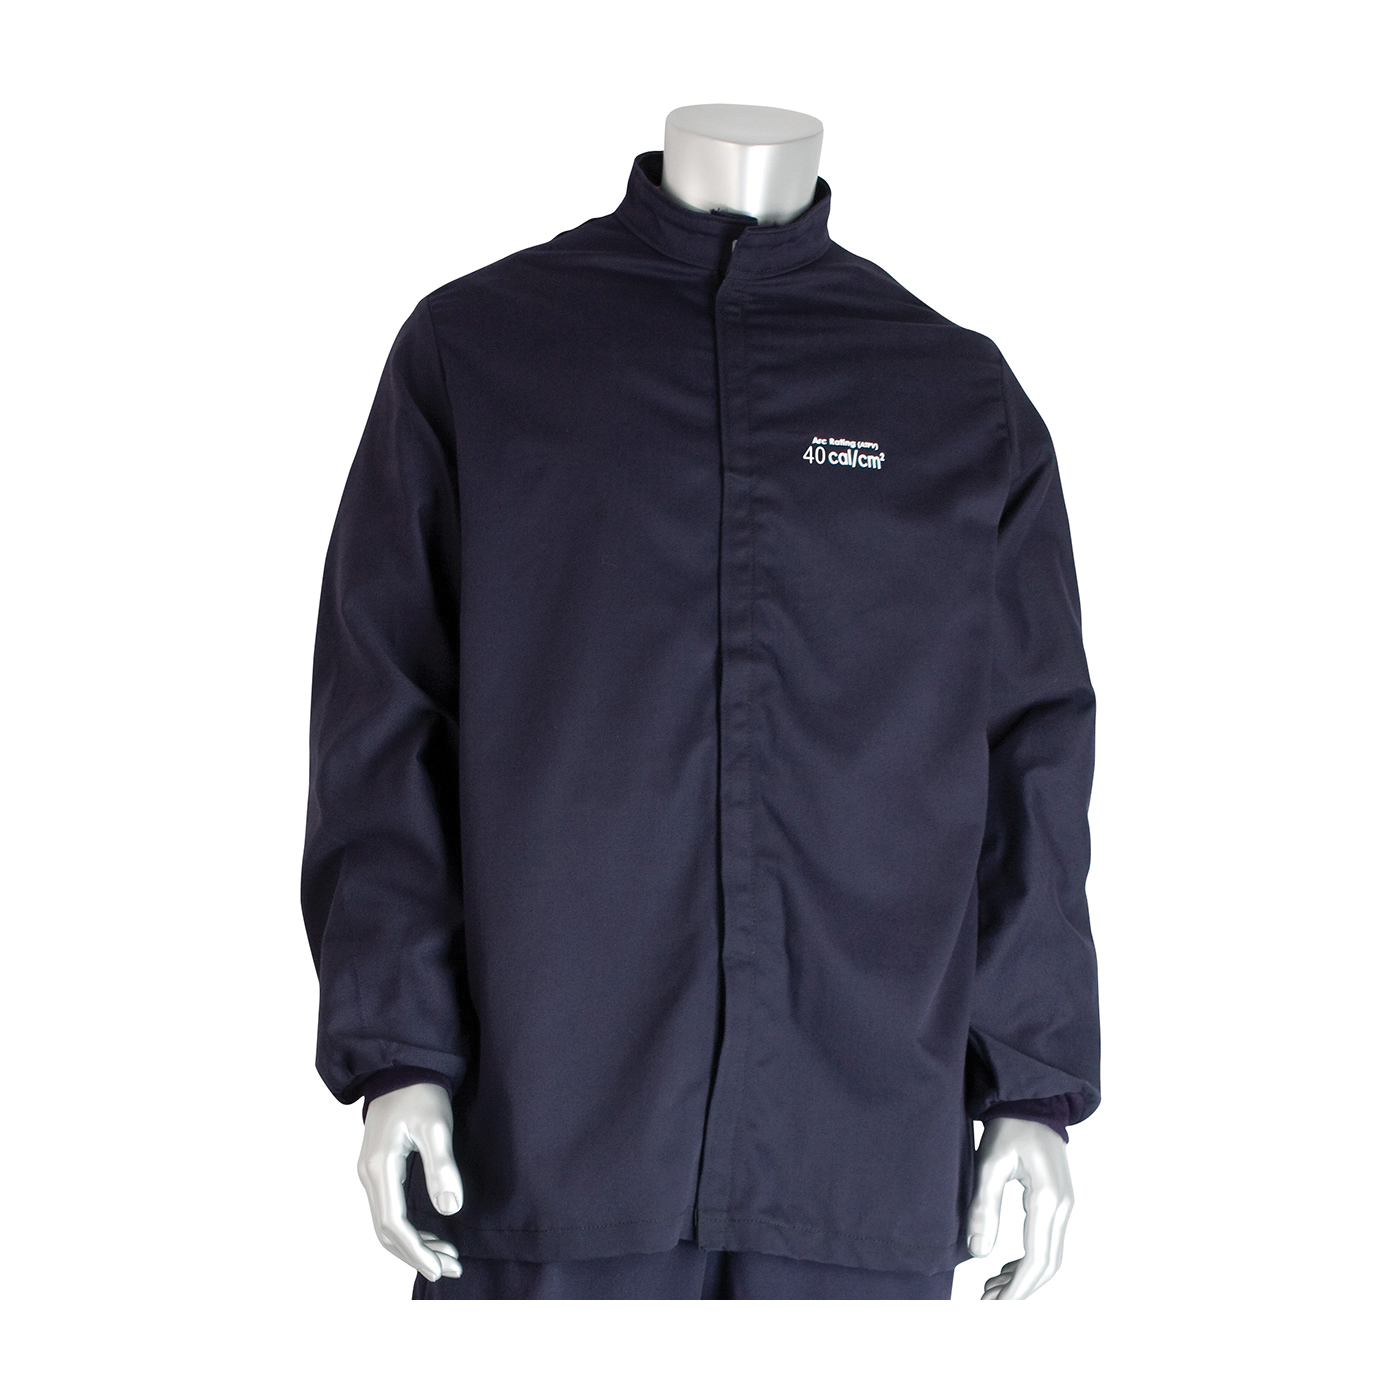 PIP® 9100-52412/5X Arc and Flame Resistant Jacket, 5XL, Navy, Westex® UltraSoft® 88% Cotton 12% High Tenacity Nylon, 64 to 66 in Chest, Resists: Arc and Flame, ASTM F1506-10a, ASTM F2178-12